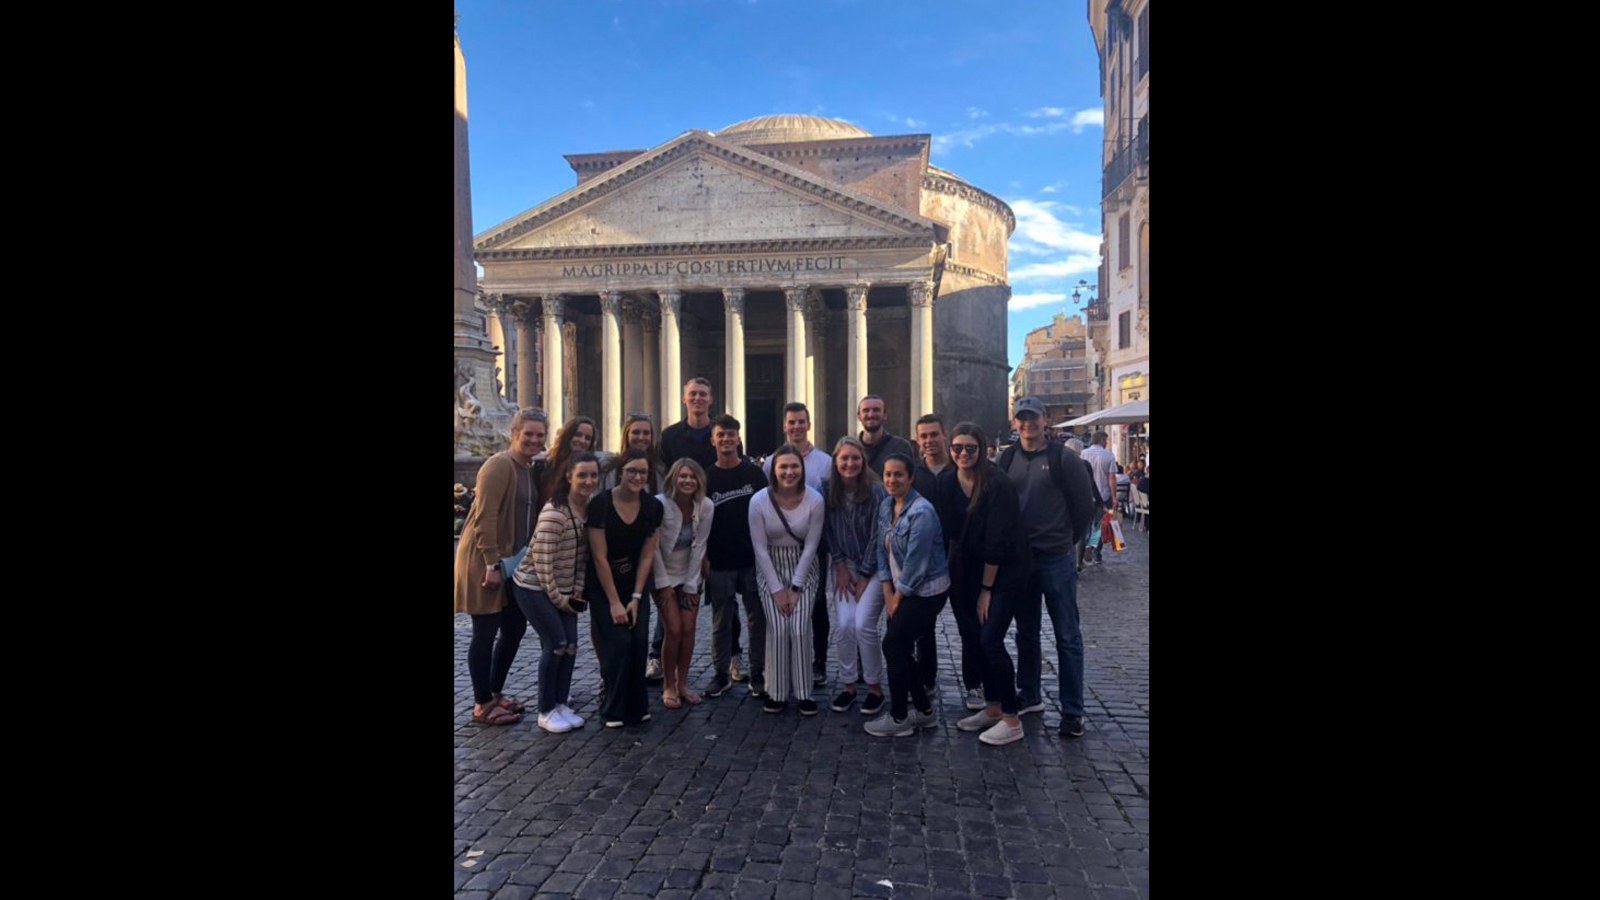 Travel study group at the Pantheon Rome